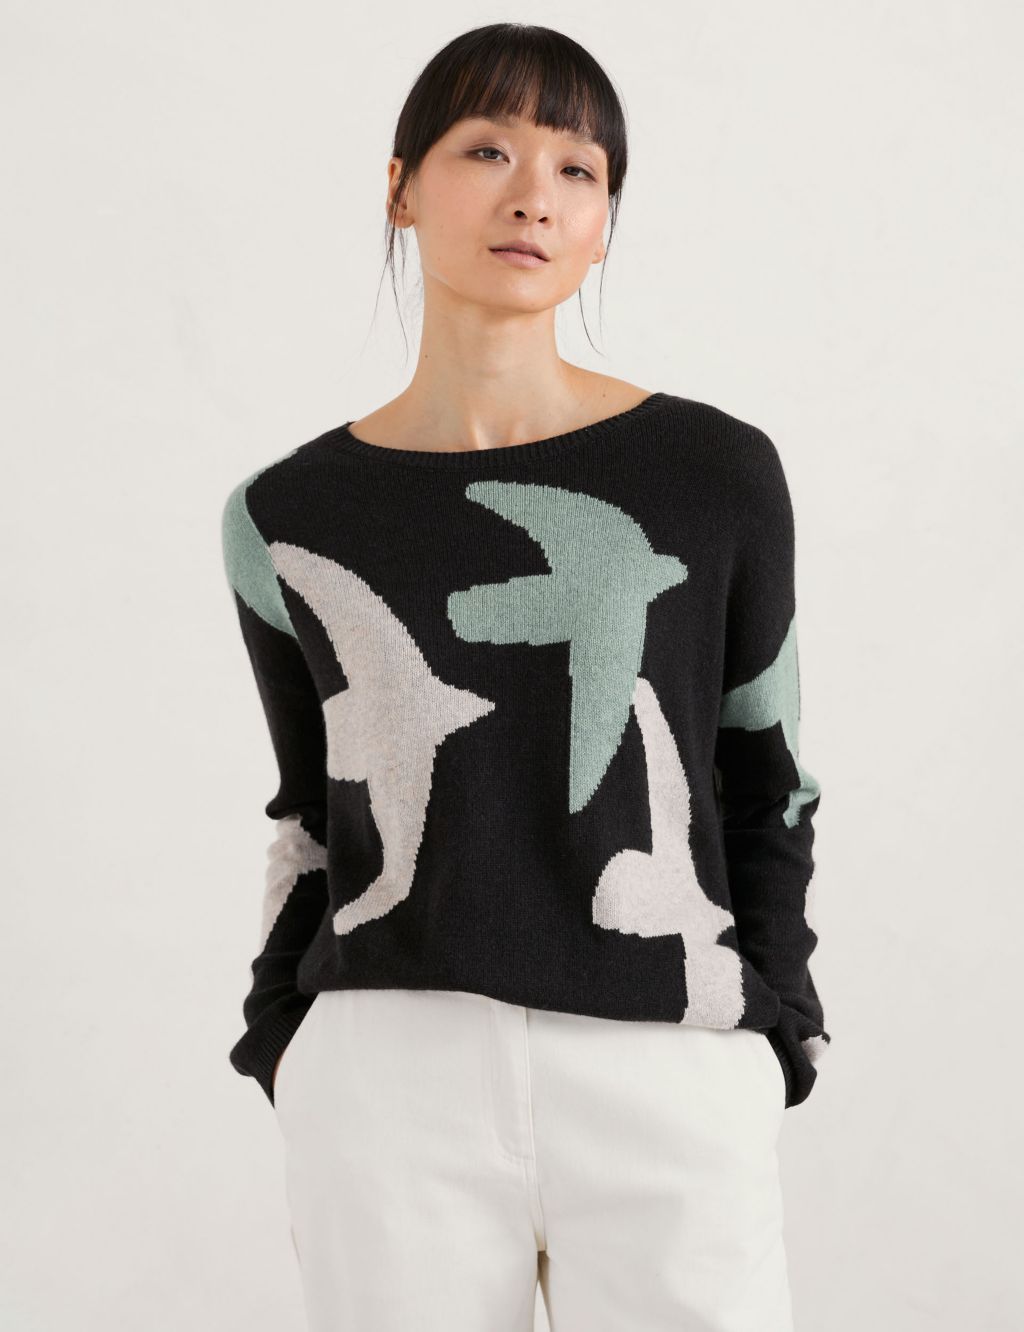 Cotton Blend Printed Jumper with Merino Wool image 1